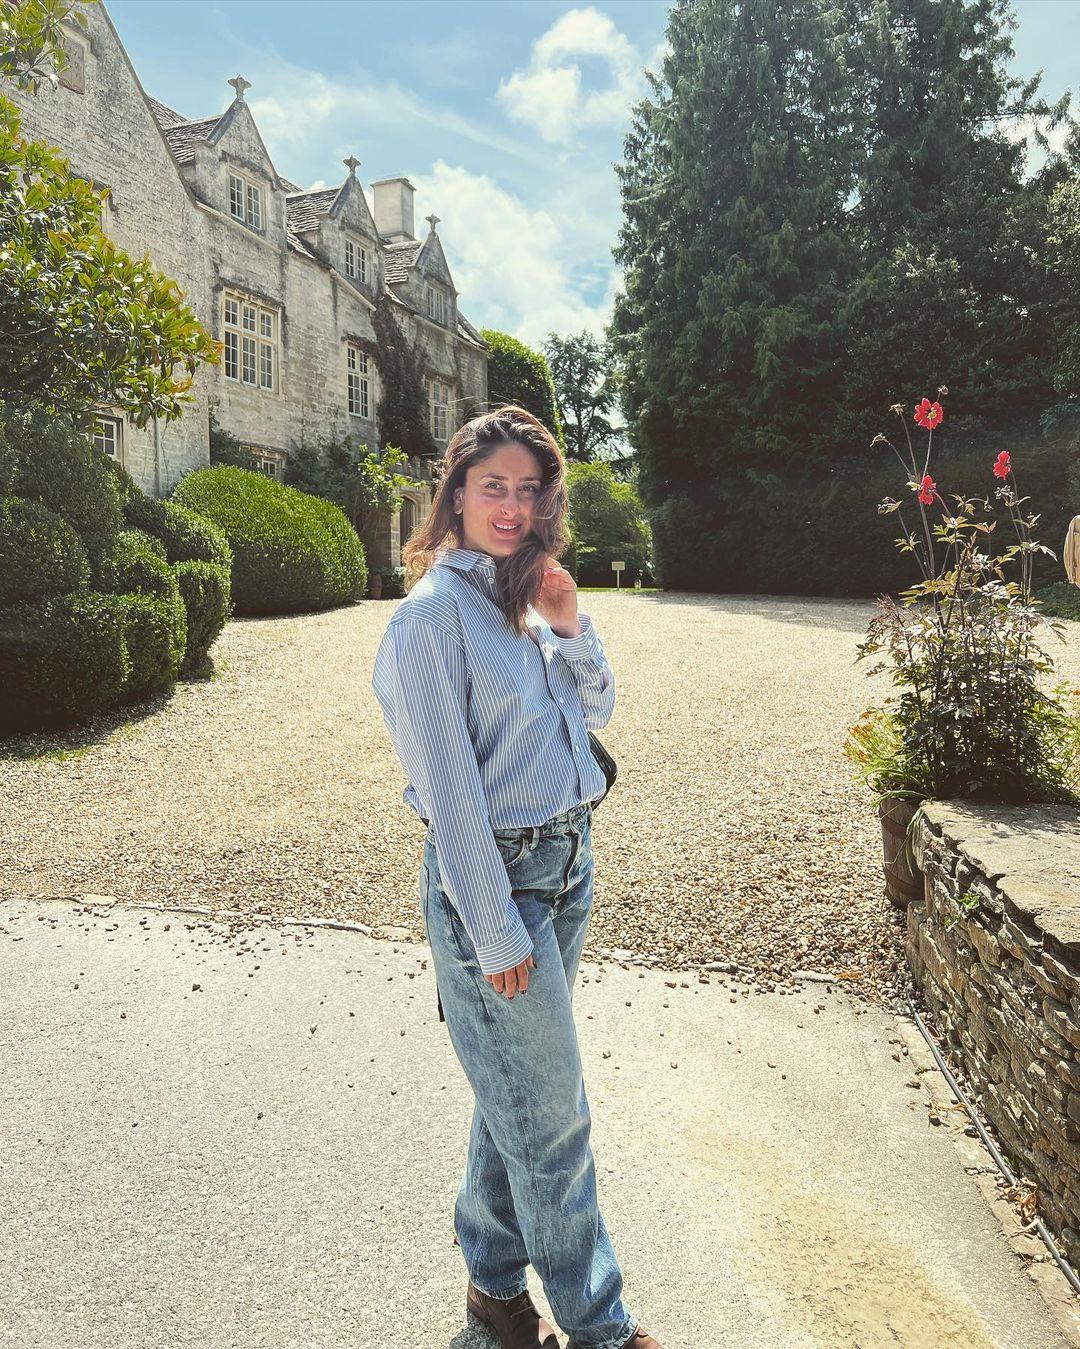 During their time in the UK, they also visited England. In this picture, Kareena posed in front of a pretty palace in the Cotswolds